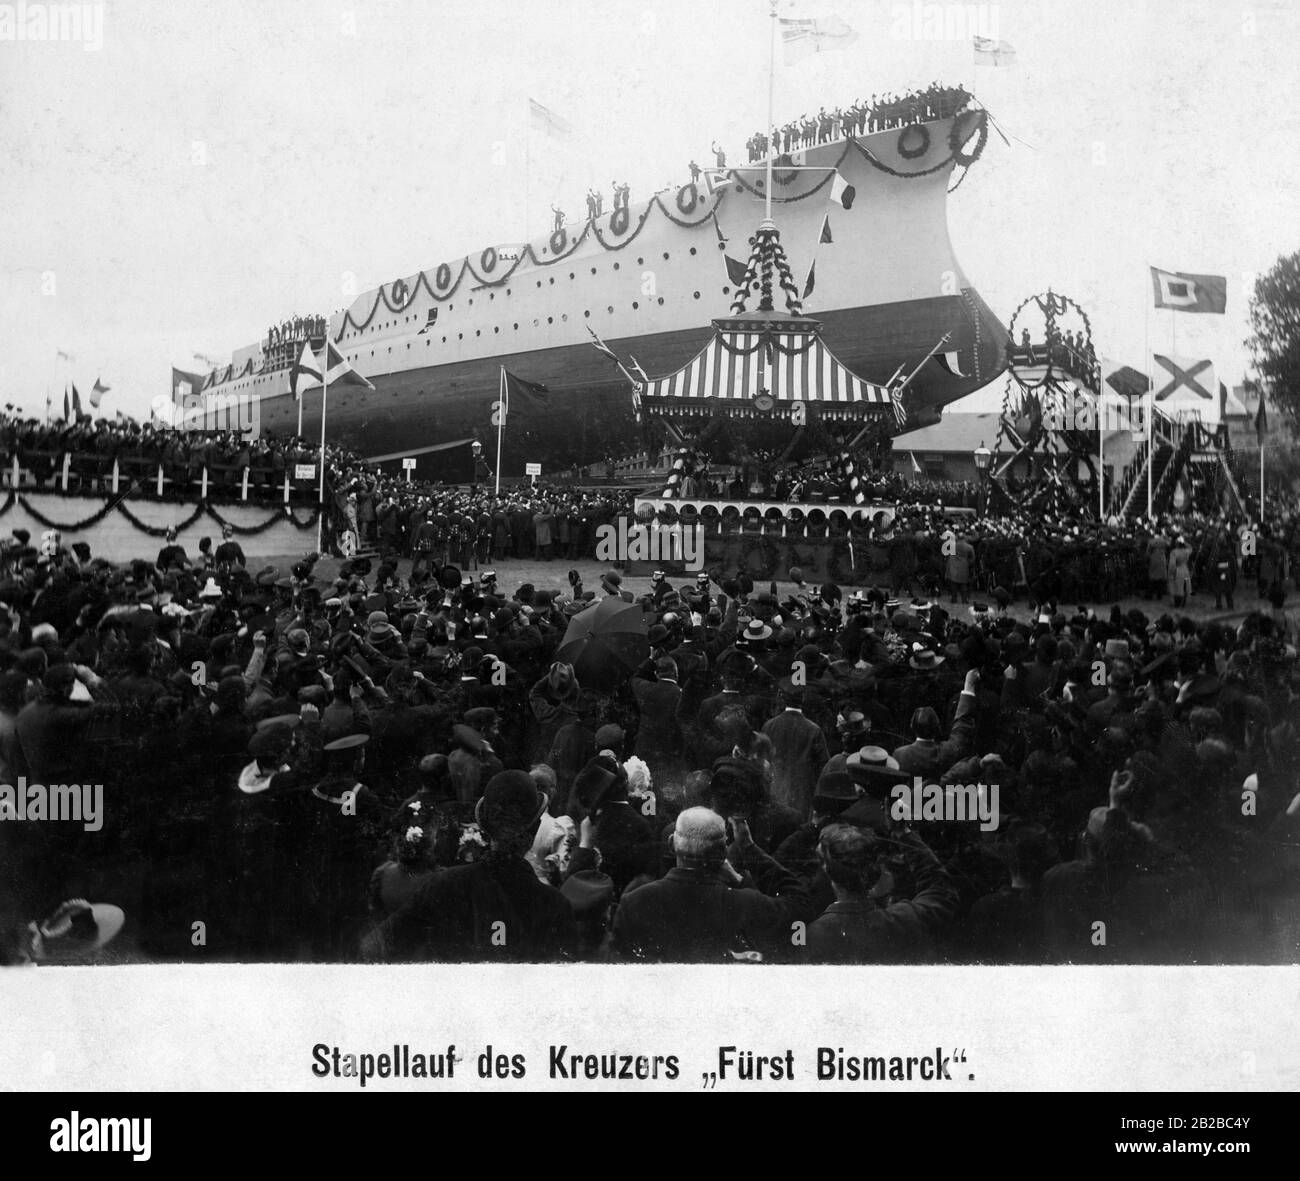 On the occasion of the launch of the cruiser SMS Fuerst Bismarck many guests gather at the imperial shipyard in Kiel. Marines are standing on the ship. The ship is an armoured cruiser. Stock Photo